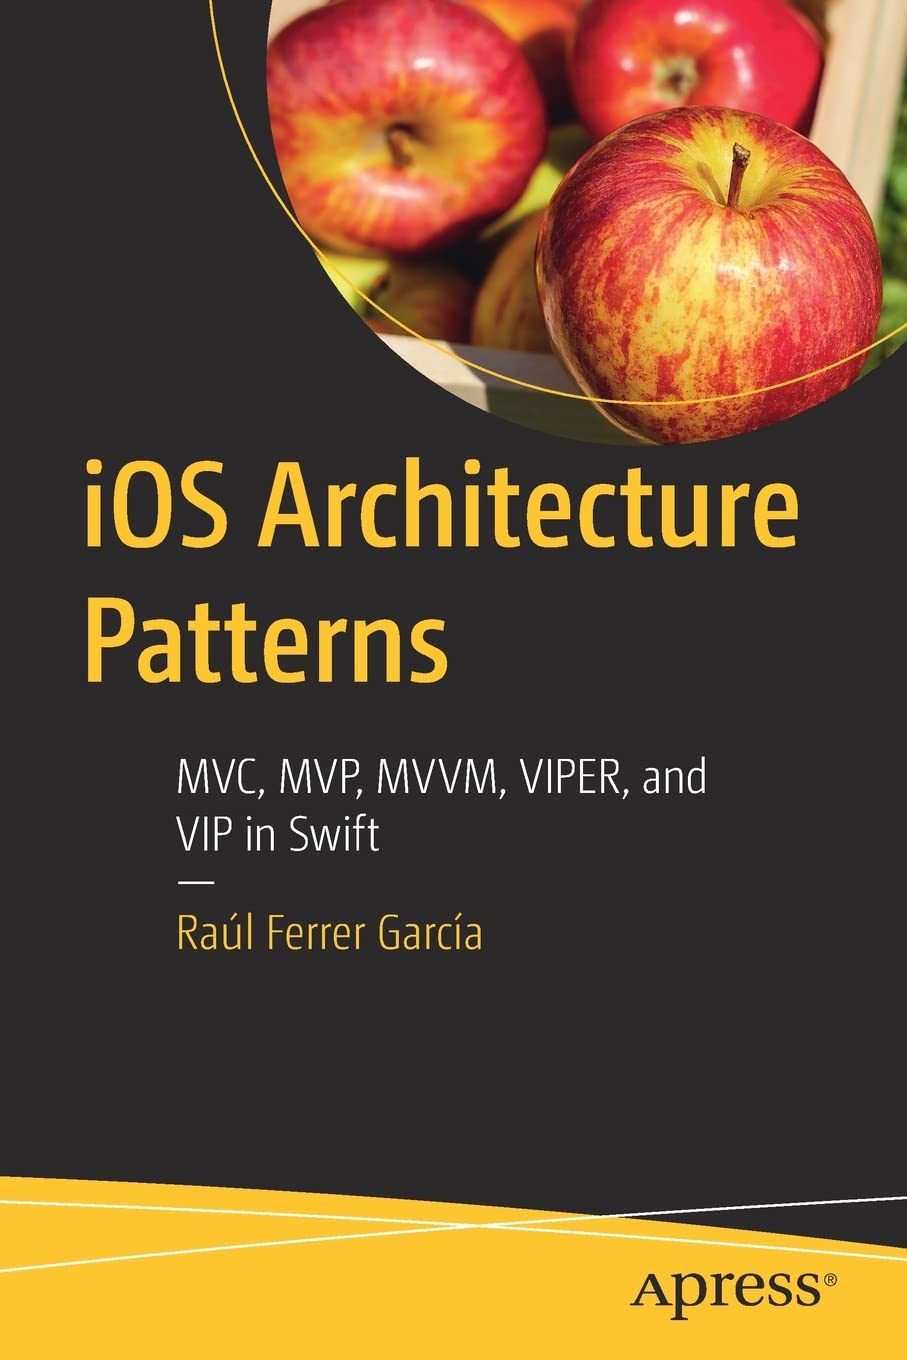 iOS Architecture Patterns: MVC, MVP, MVVM, VIPER, and VIP in Swift